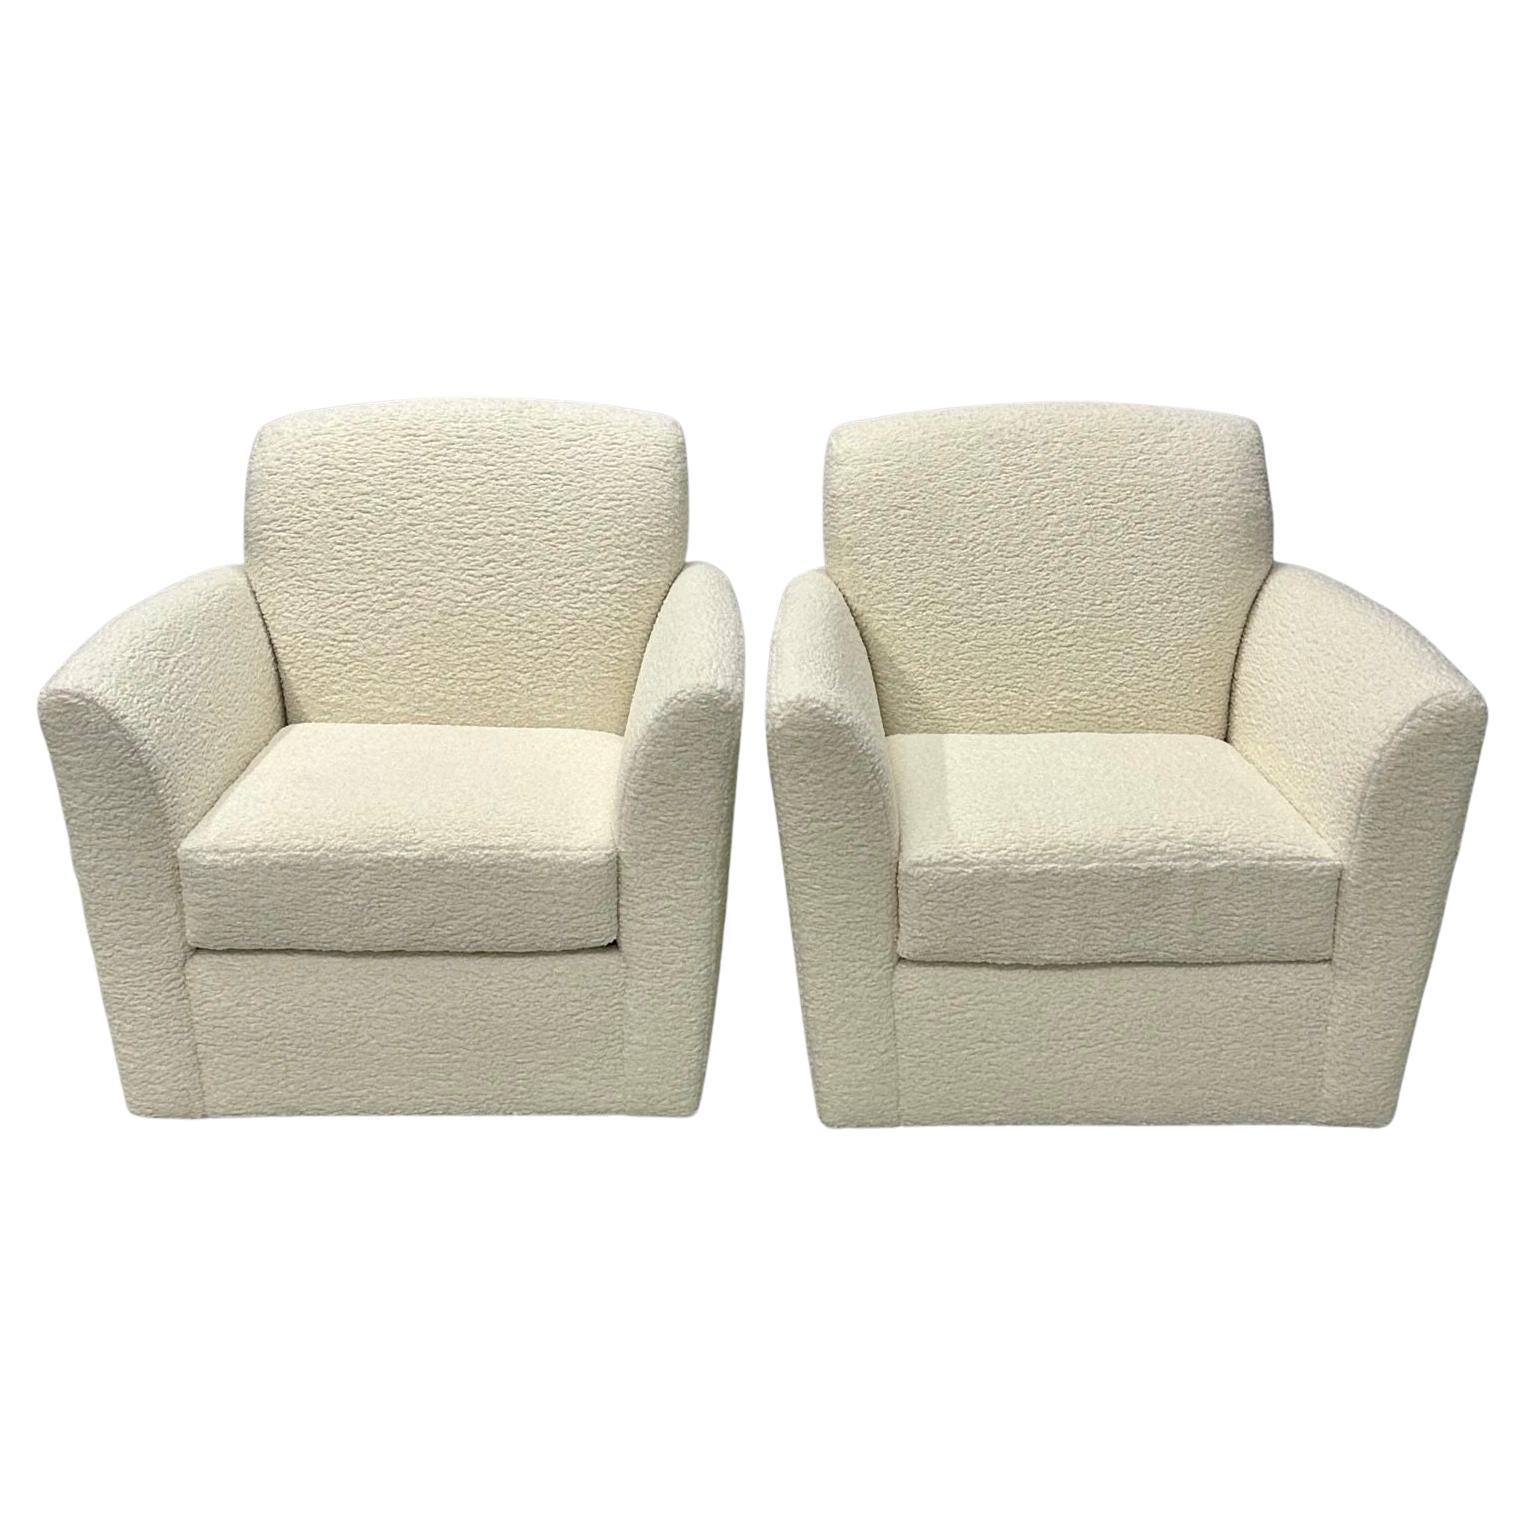 Pair of Mid-Century Modern Square White Boucle Rocking Lounge / Swivel Chairs